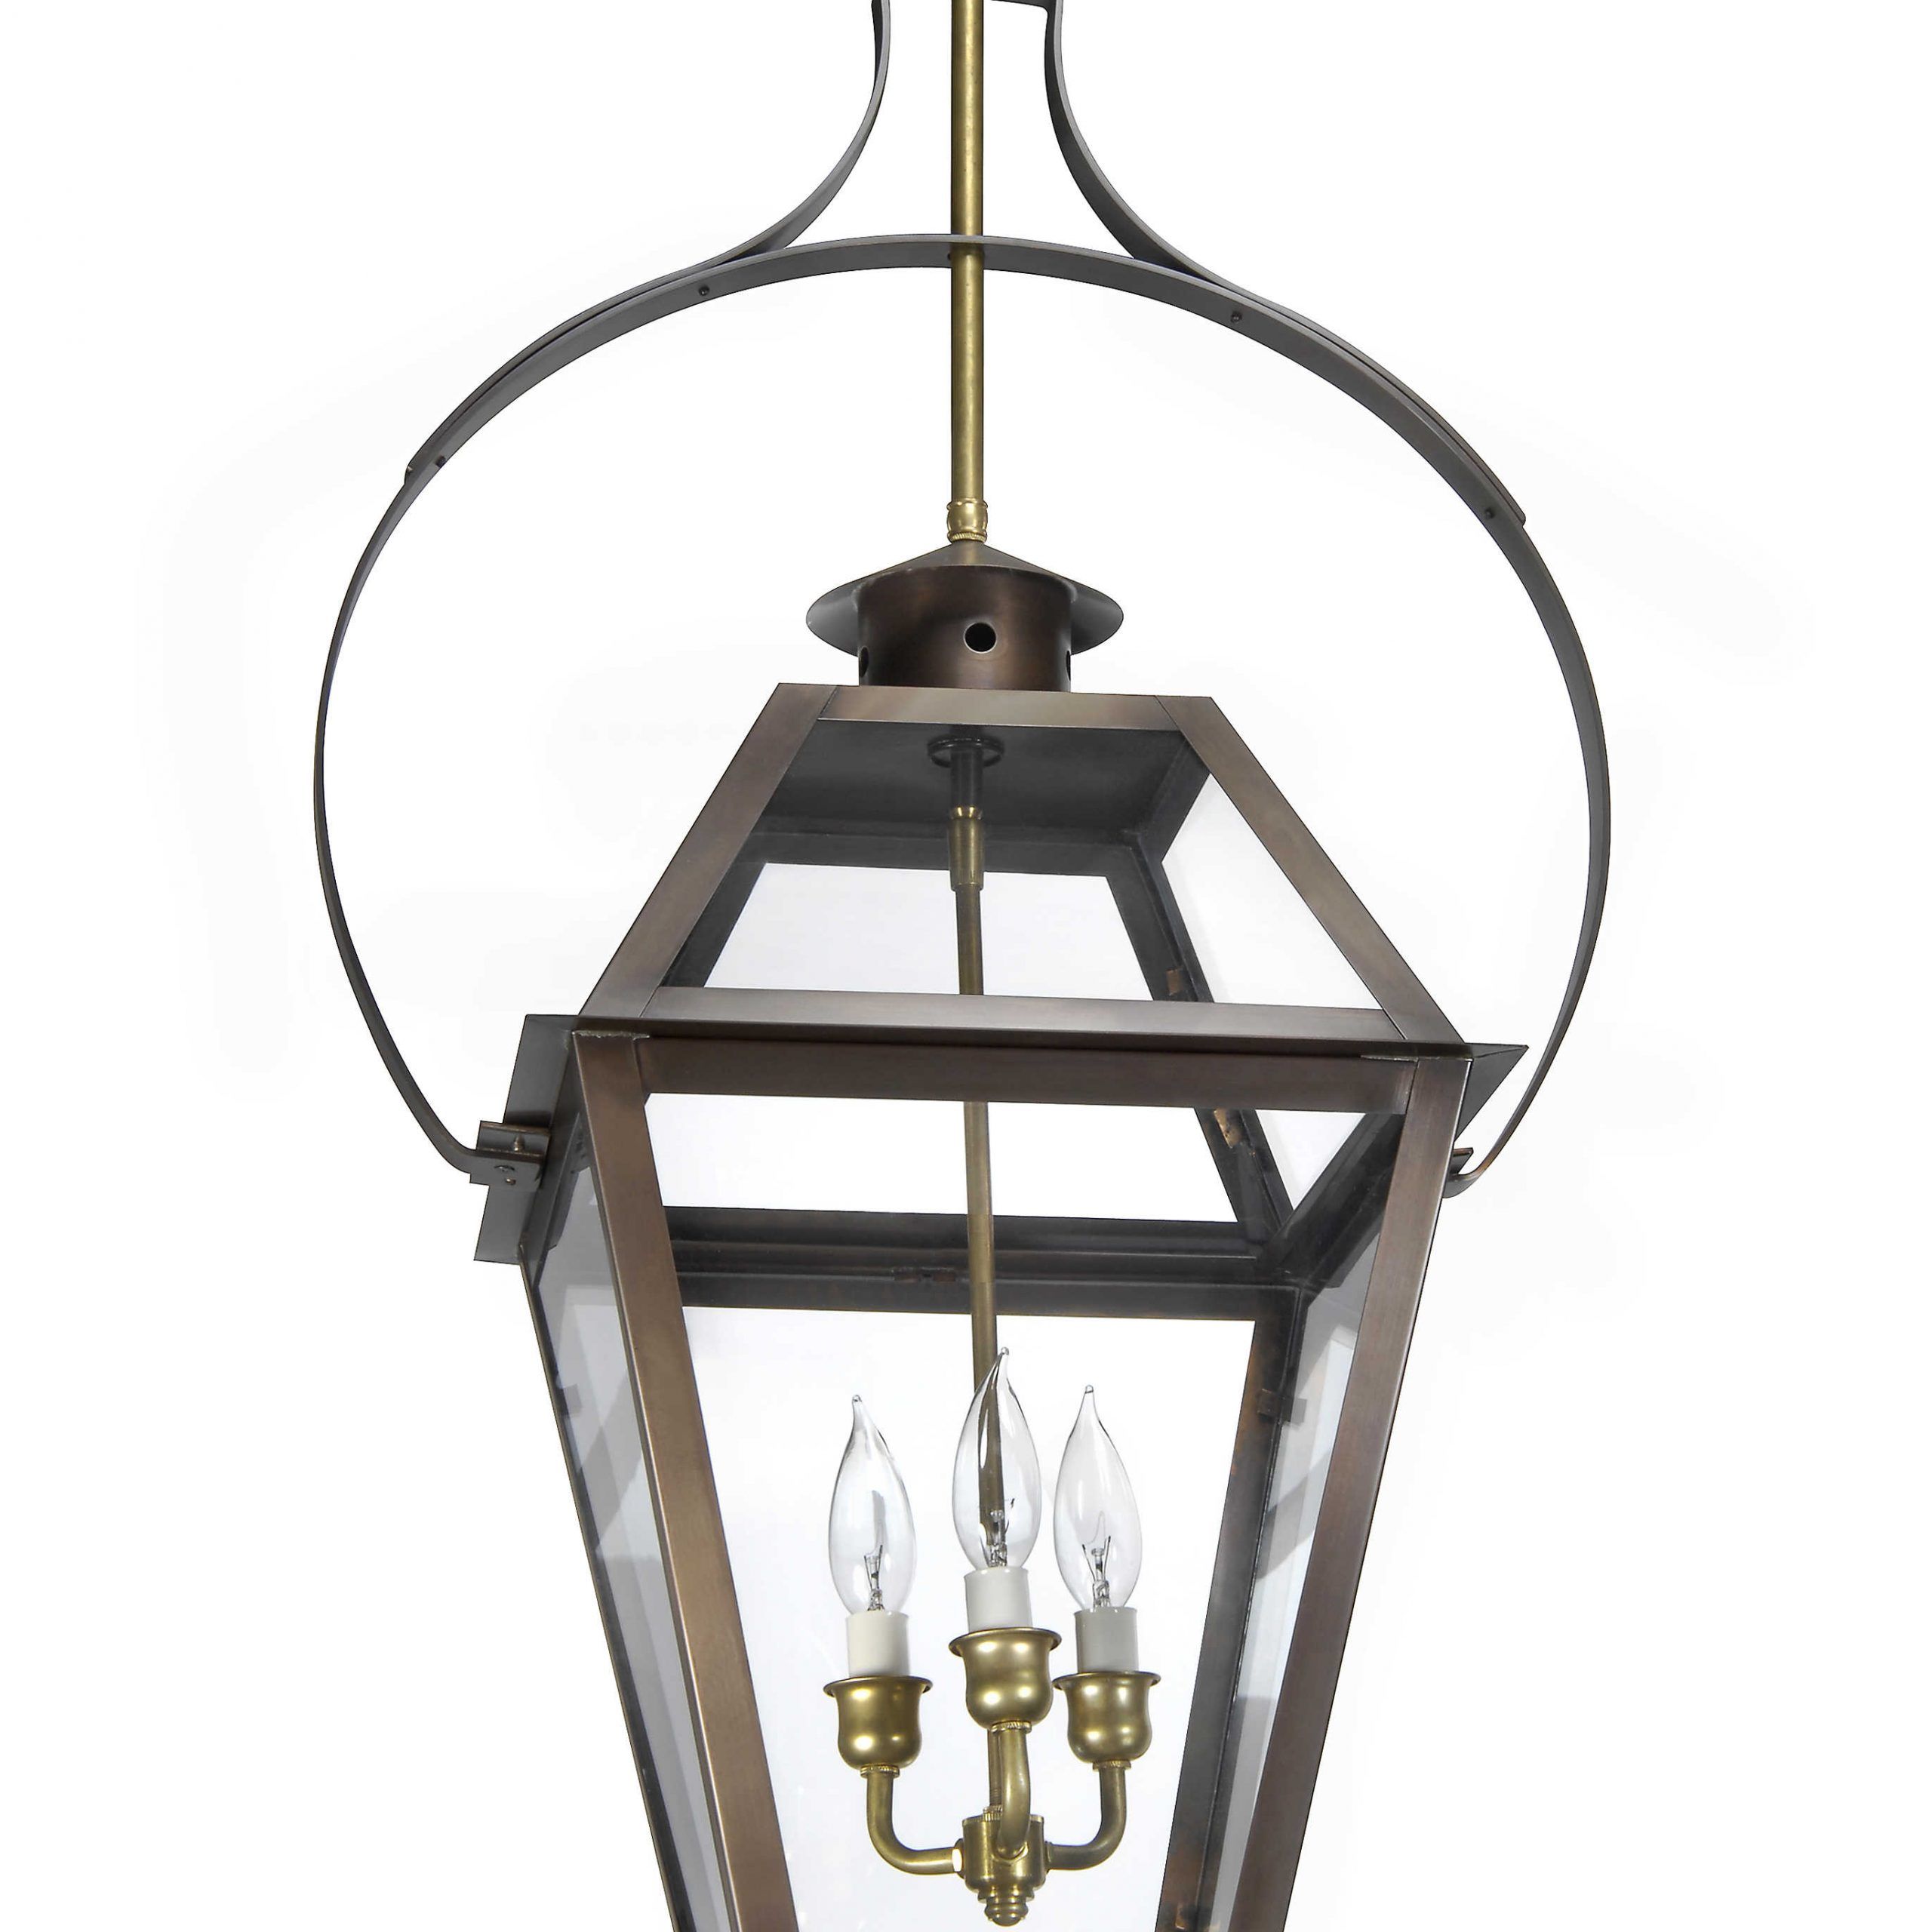 Charleston Collection | Ch 23 Hanging Yoke Light– Lantern & Scroll With Regard To 23 Inch Lantern Chandeliers (View 10 of 15)